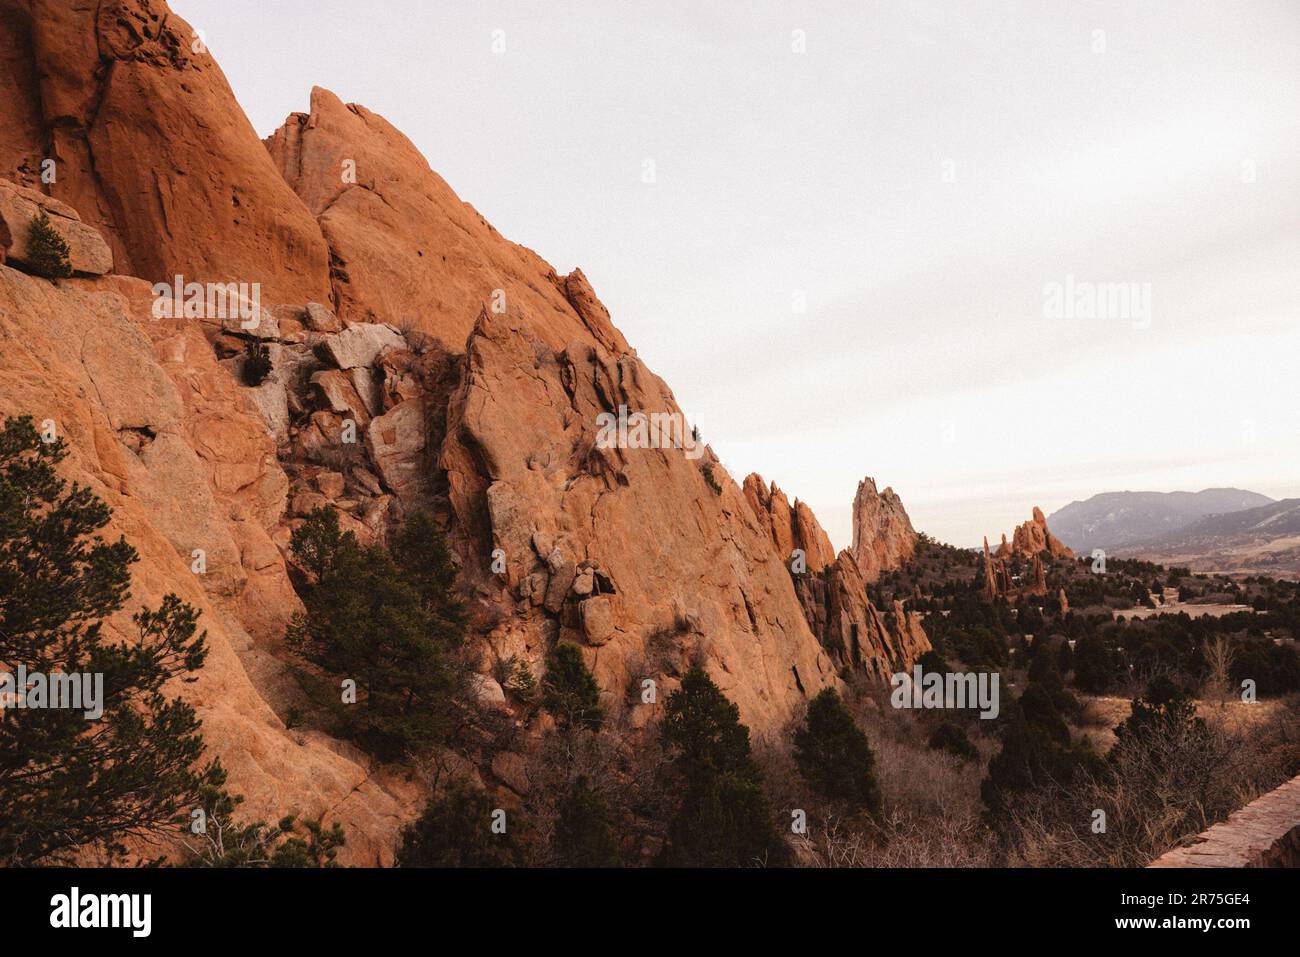 A stunning view of a rocky mountain landscape in Garden of the Gods, Colorado Stock Photo